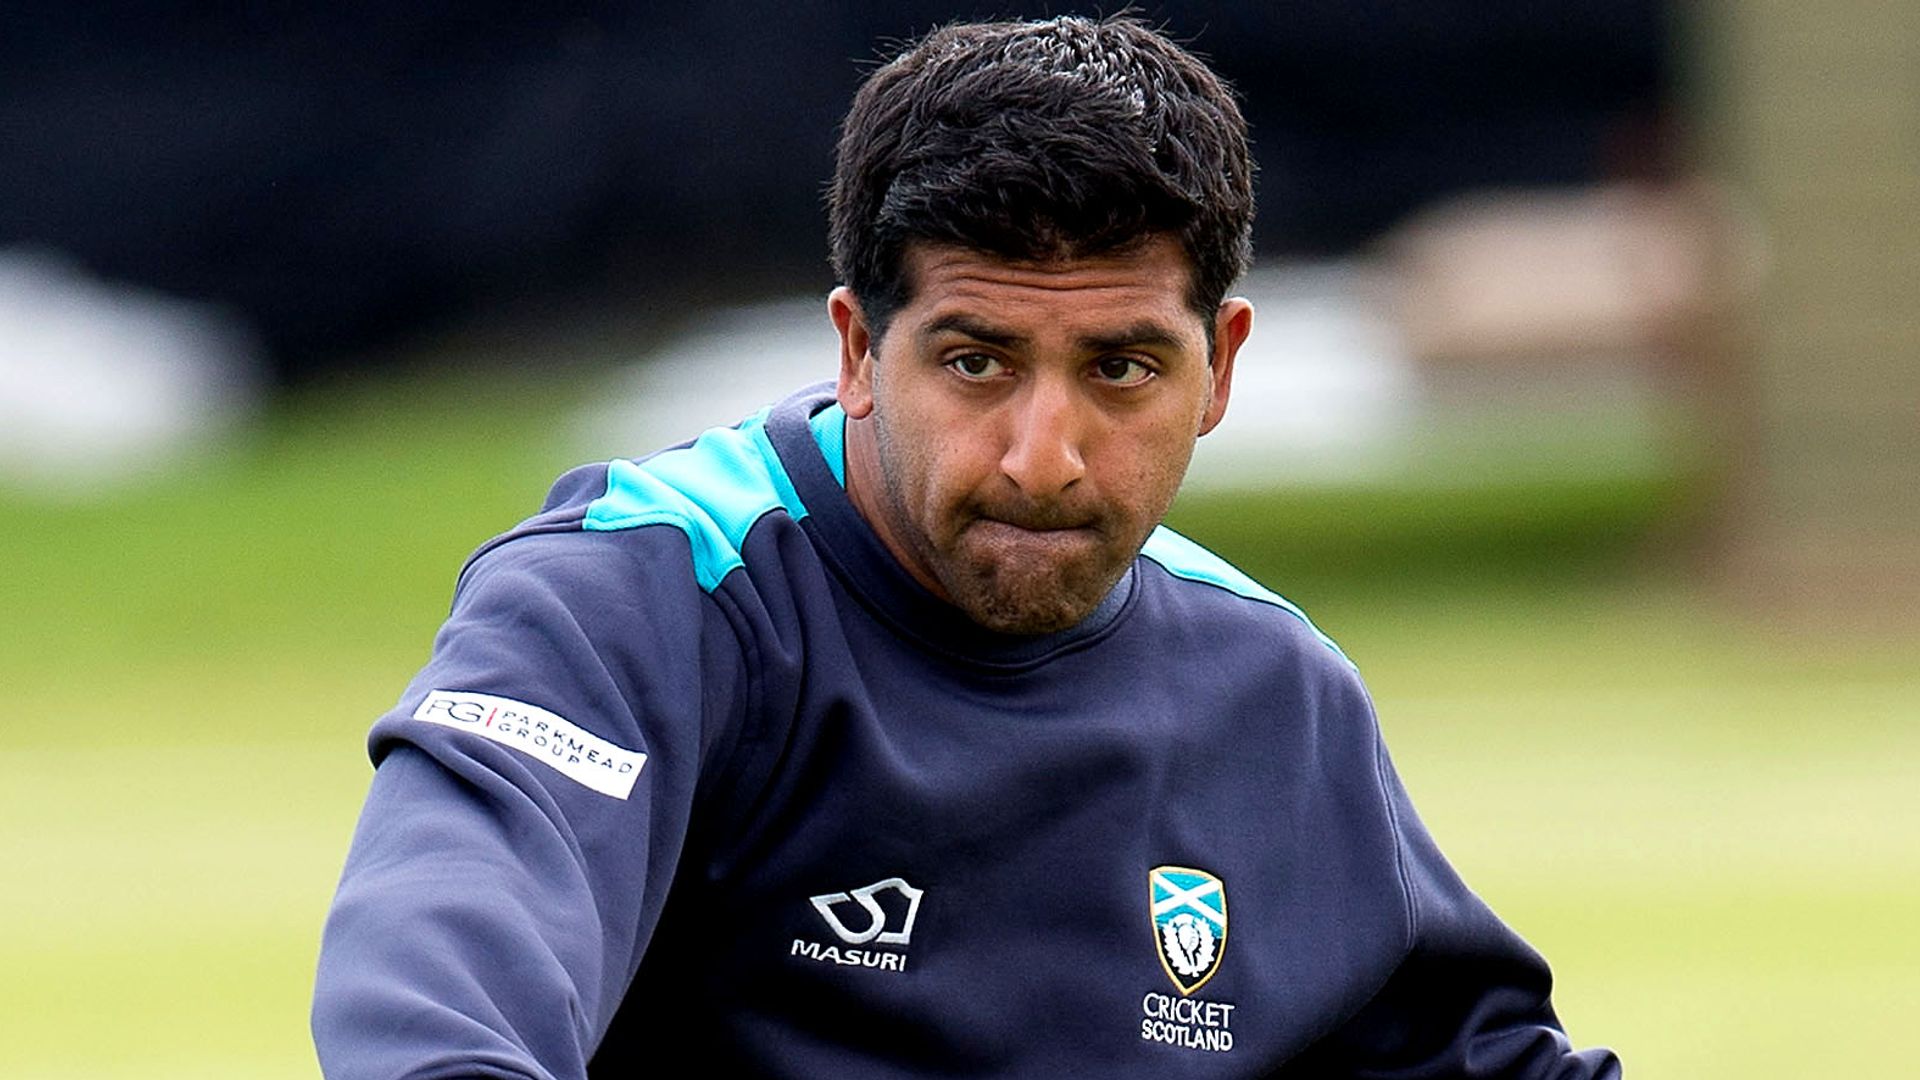 Former Scotland bowler Haq allegedly racially abused while umpiring